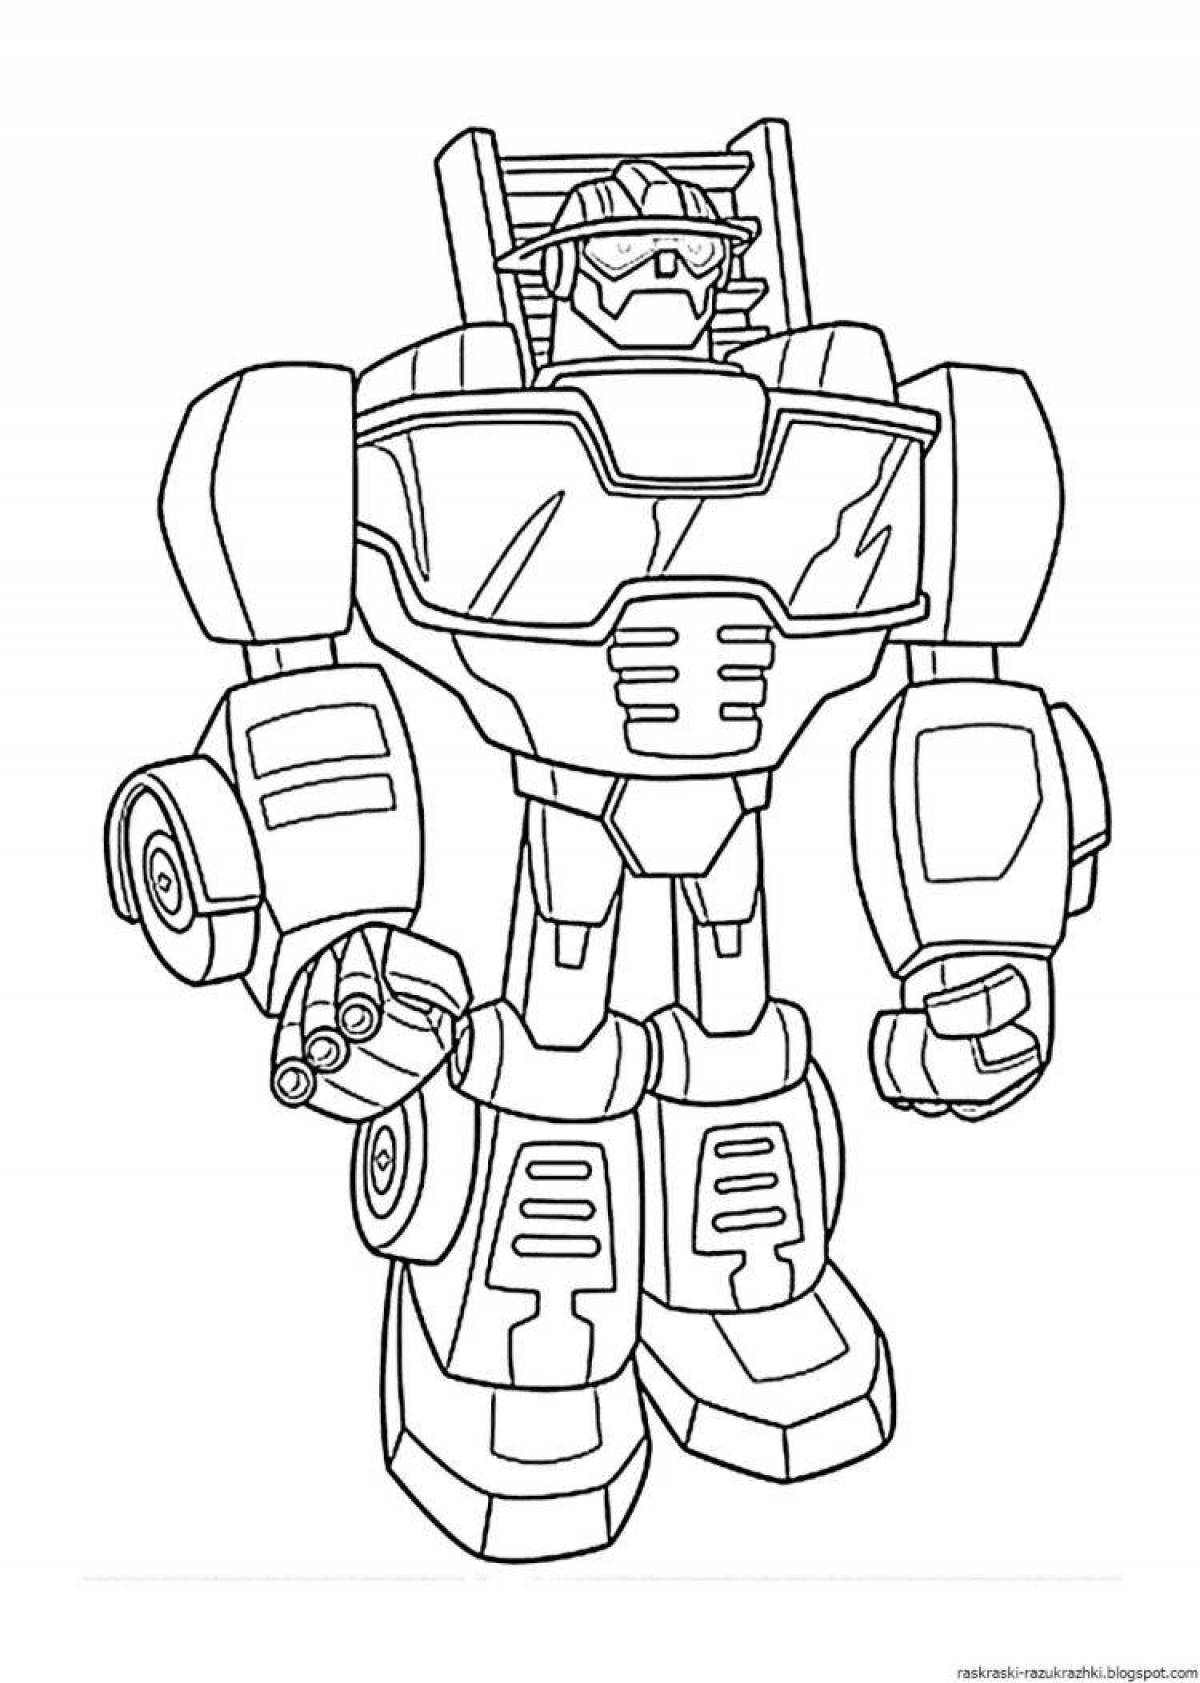 Great autobot coloring page